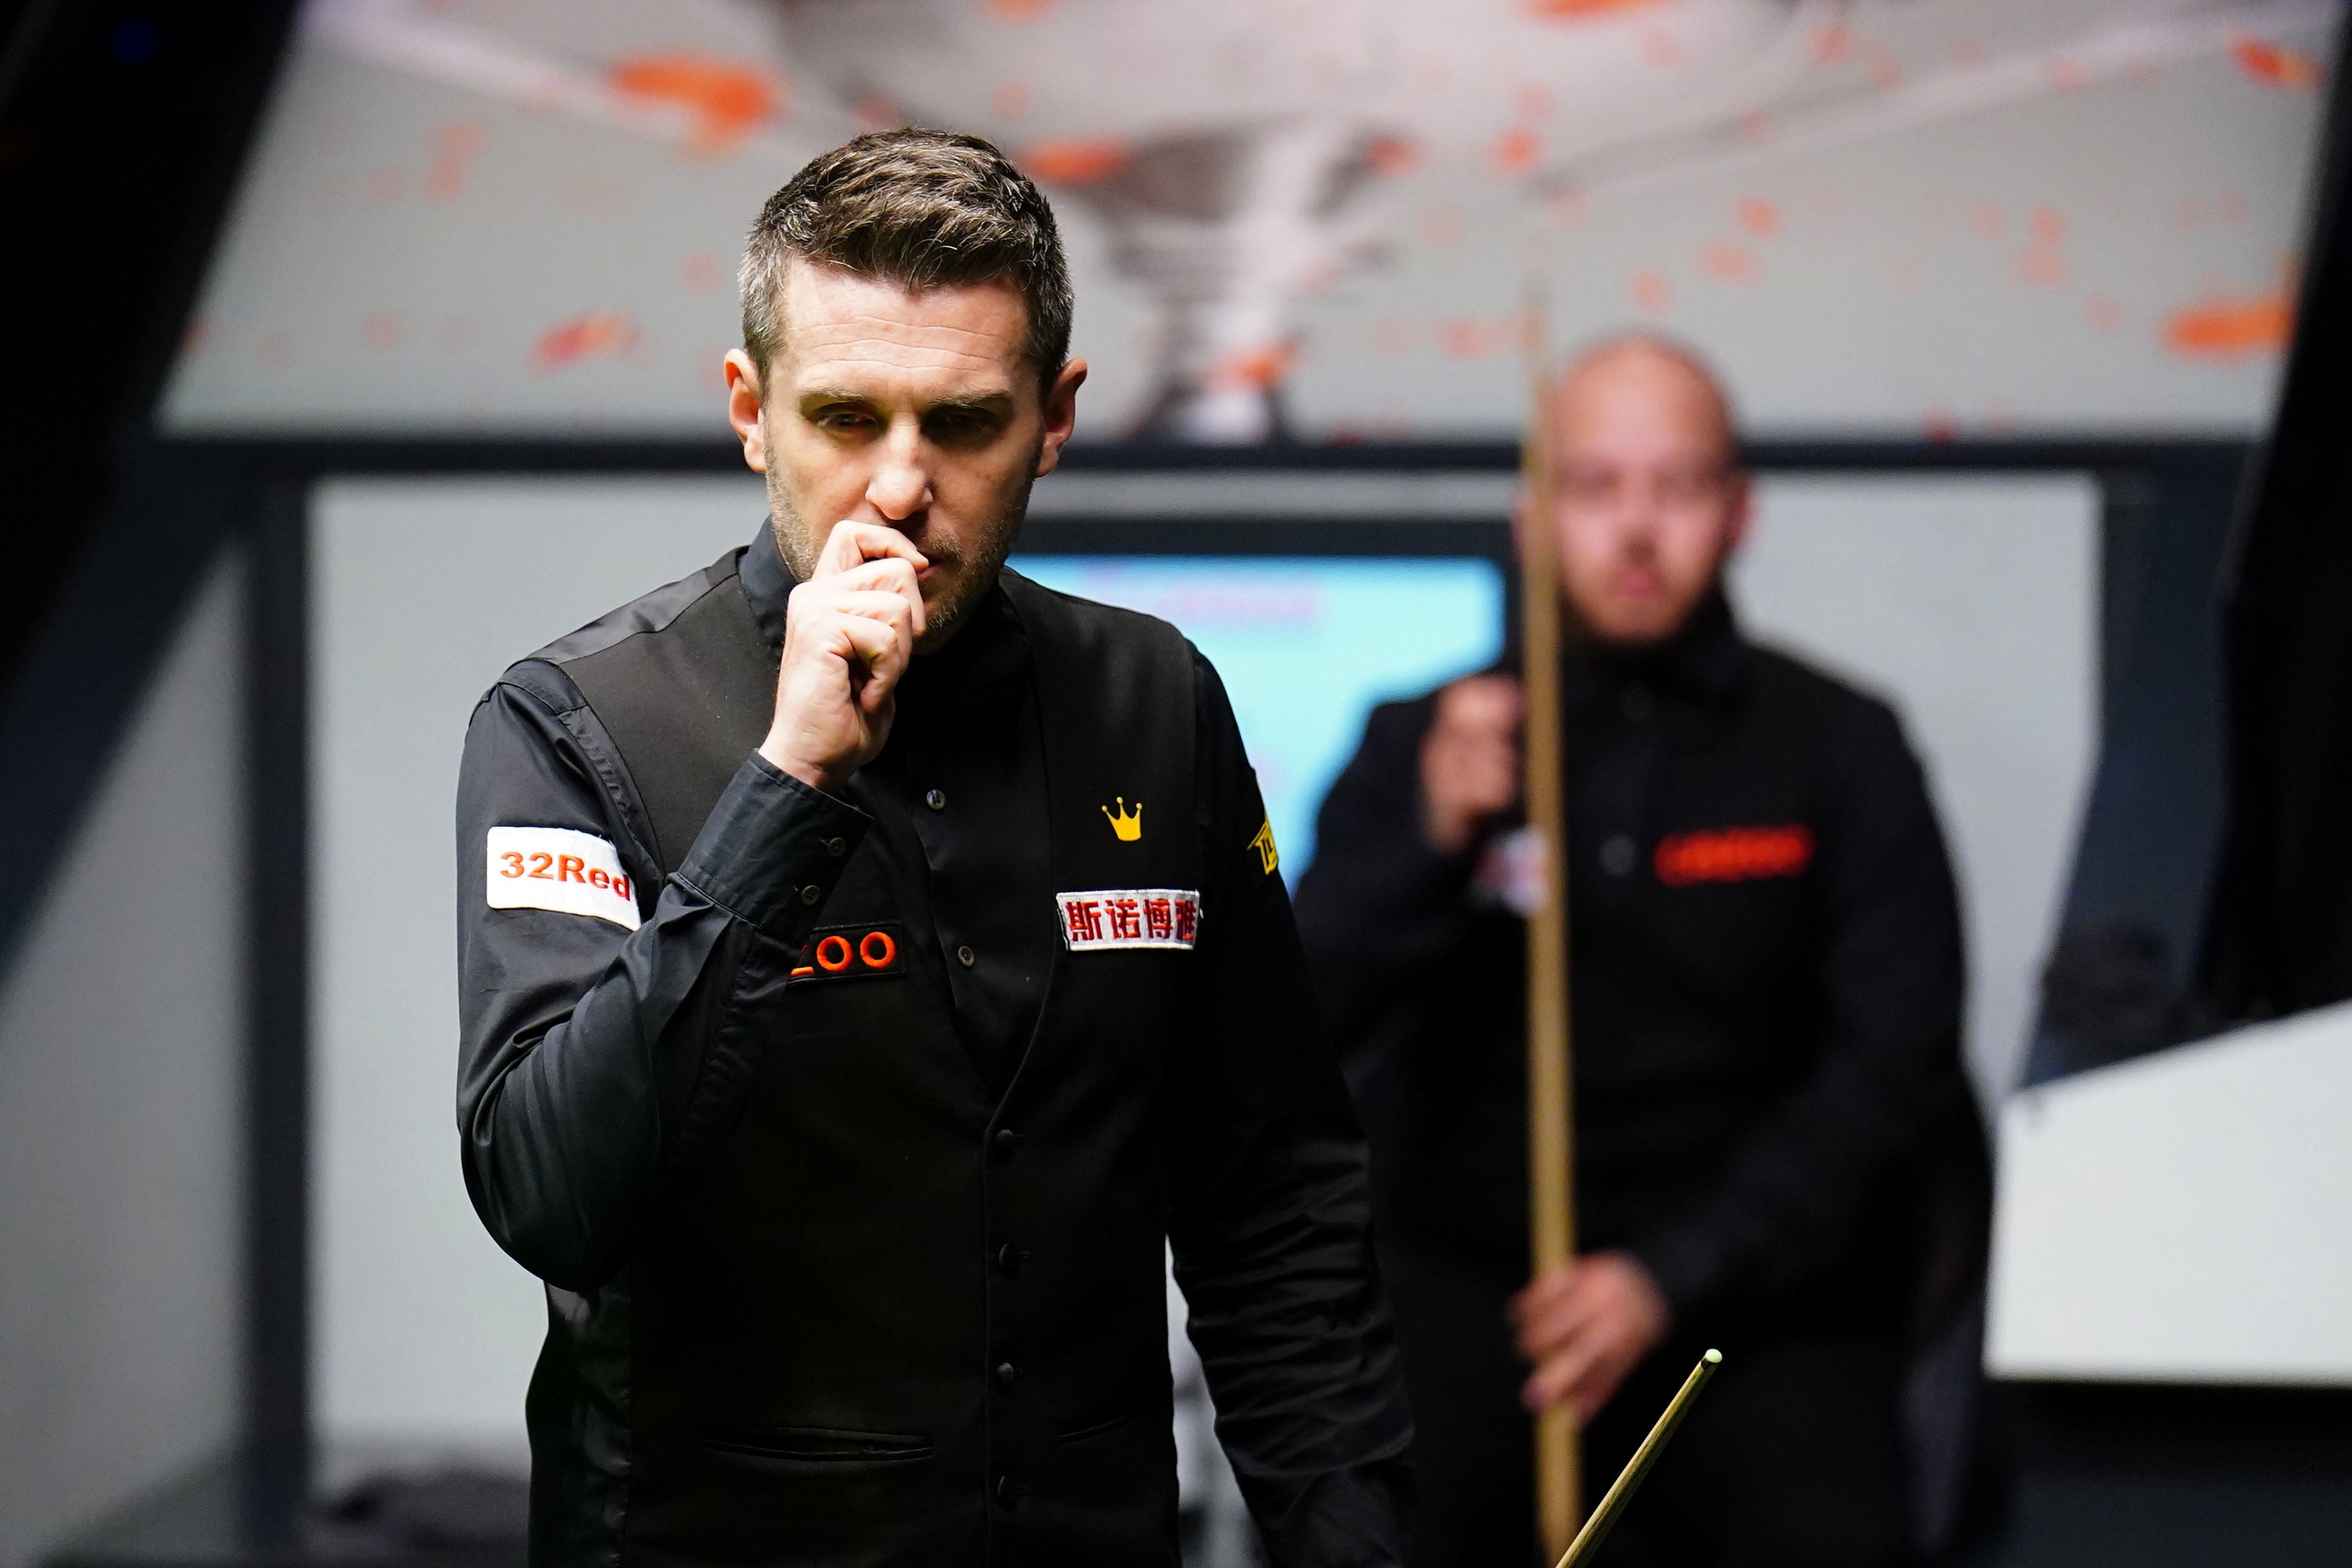 World Snooker Championship LIVE Score and result as Luca Brecel holds off Mark Selby to win maiden title The Independent